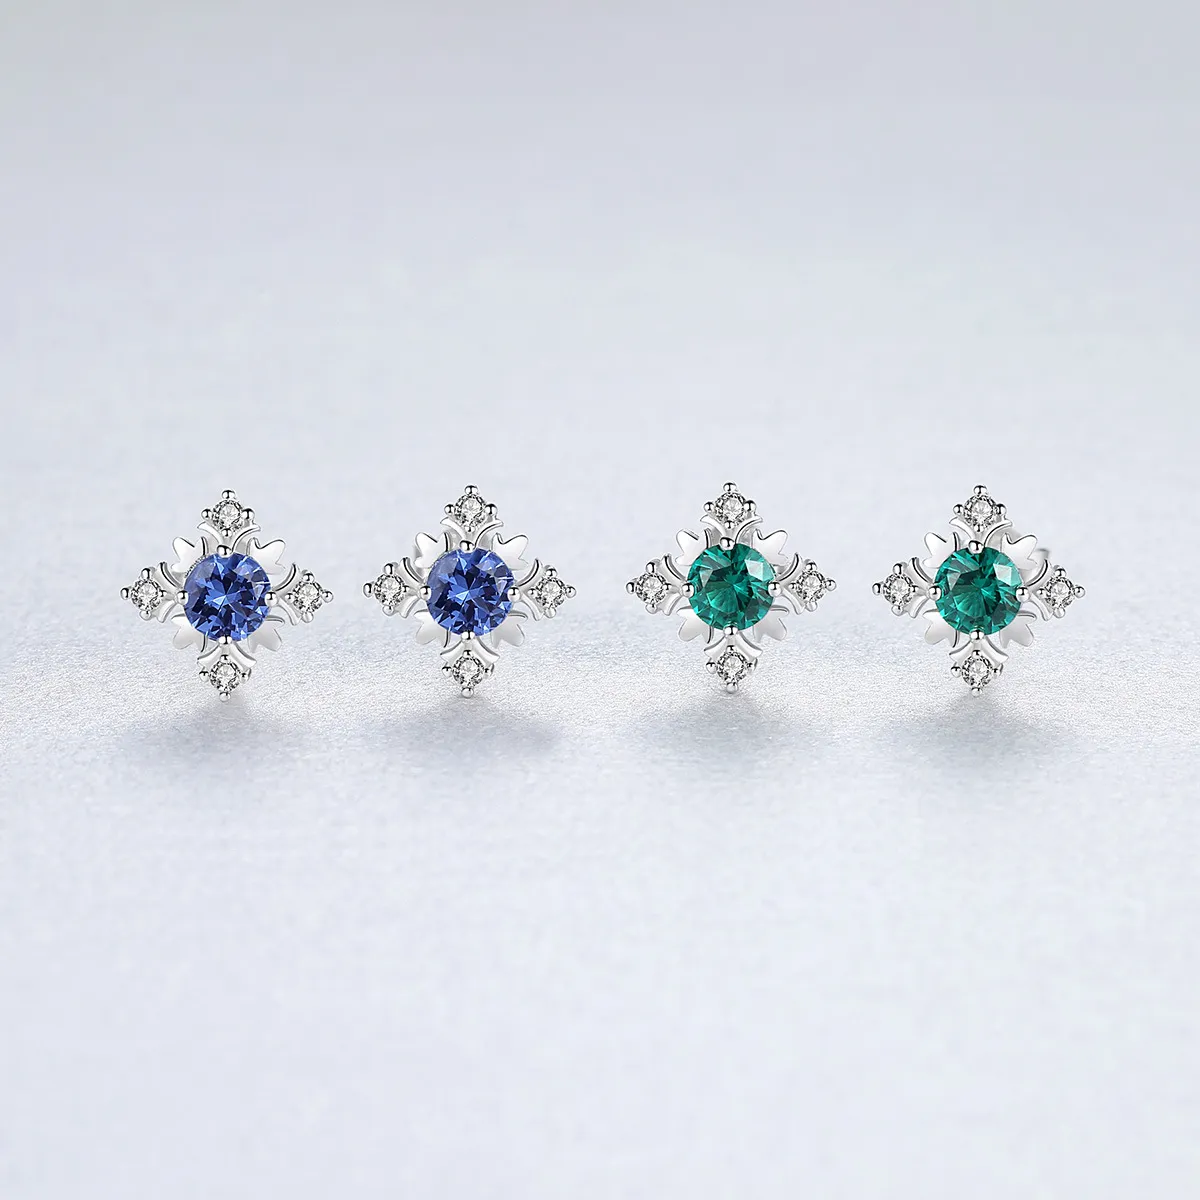 Geometric Design Micro-set Colour Gemstone s925 Silver Stud Earrings European Retro Sexy Charming Women Earrings Luxury Exquisite Jewelry Gifts